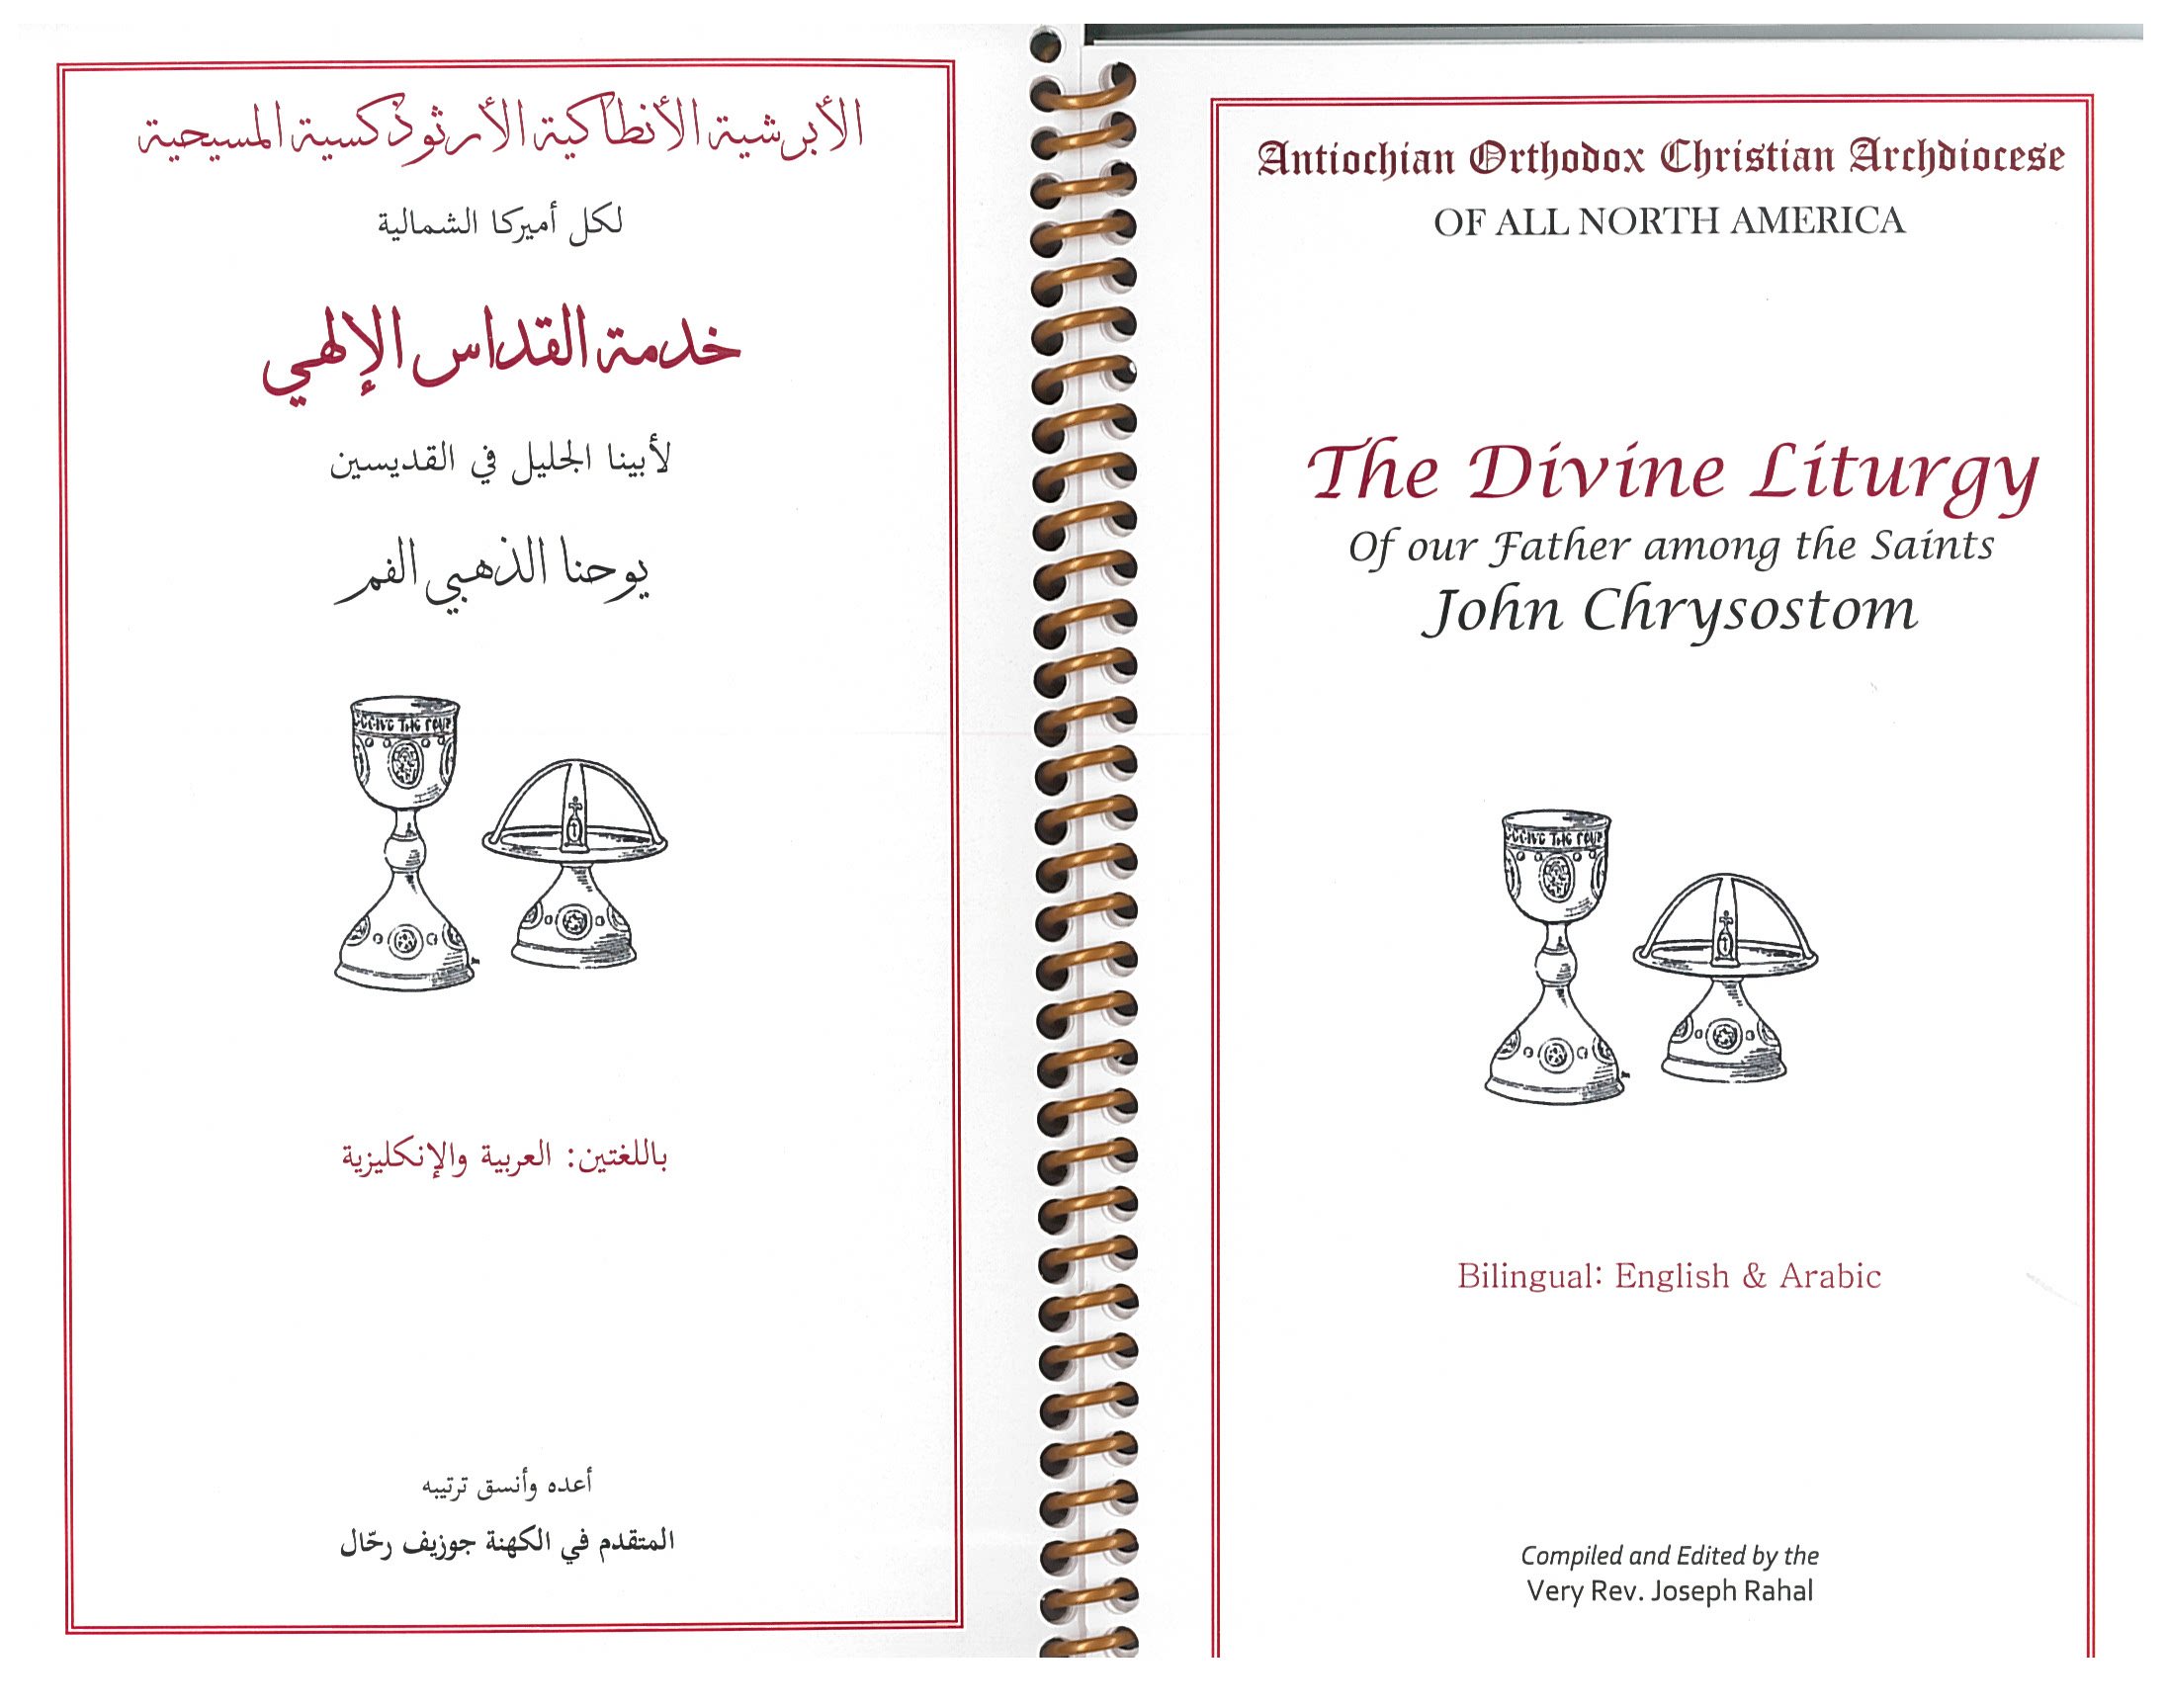 The Divine Liturgy in Arabic and English